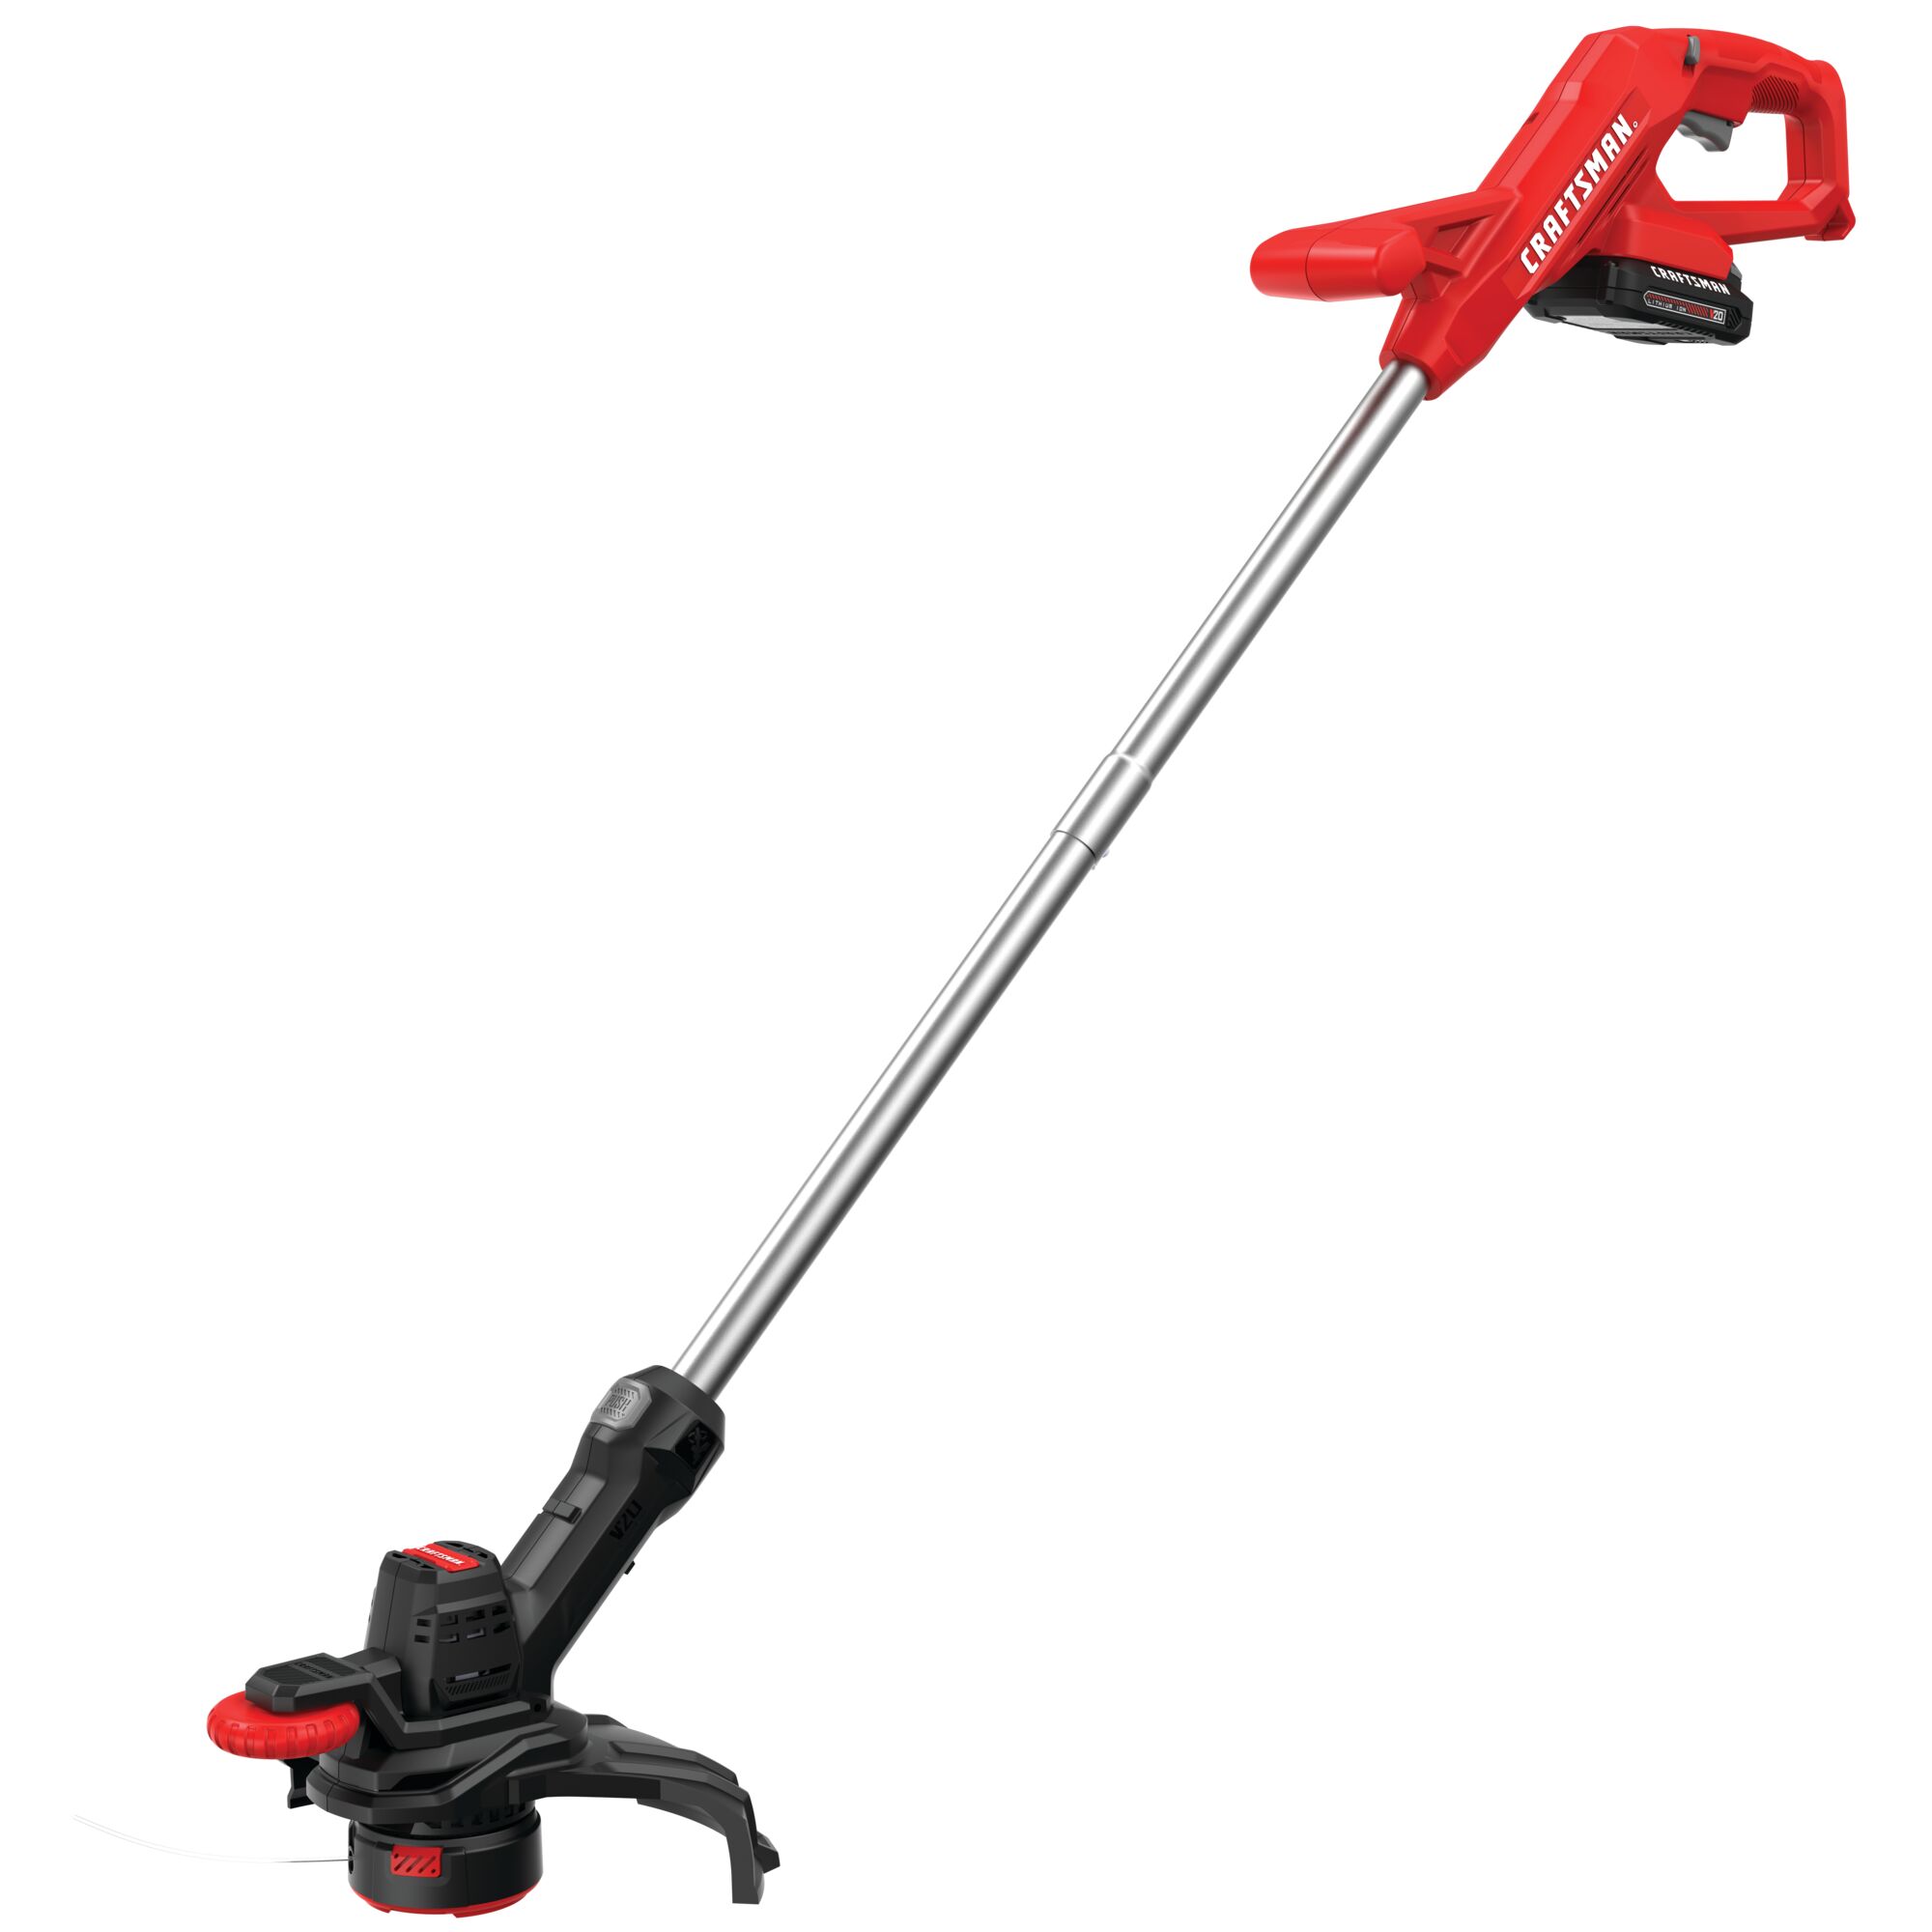 Left profile of 20 volt cordless 10 inch weedwacker string trimmer and edger.